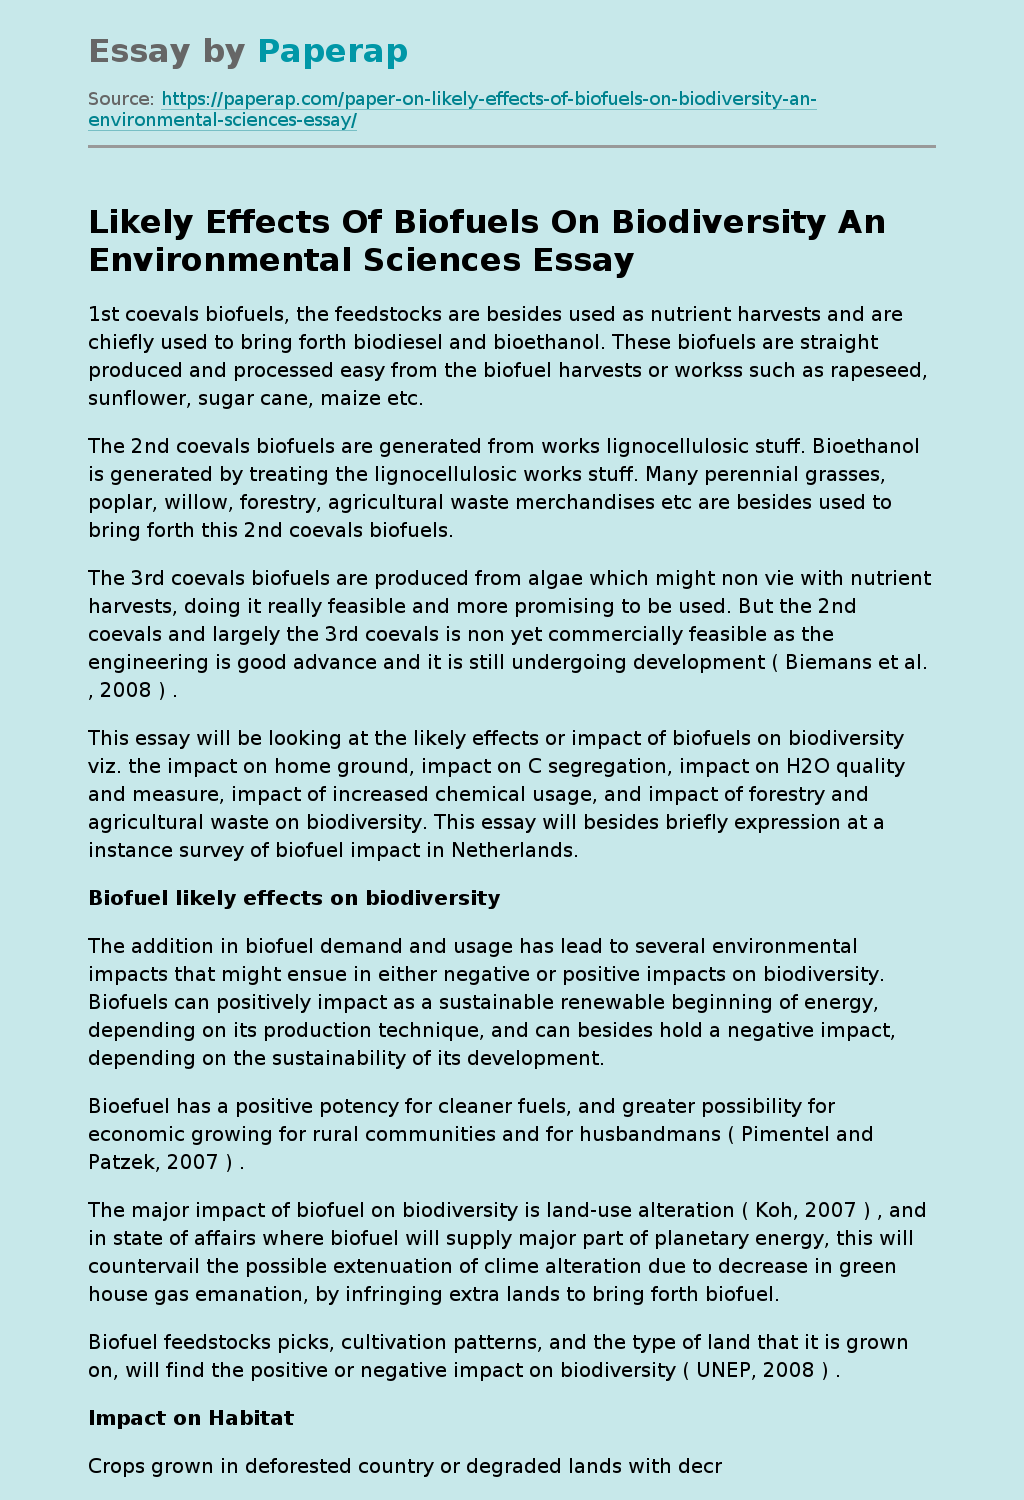 Likely Effects Of Biofuels On Biodiversity An Environmental Sciences